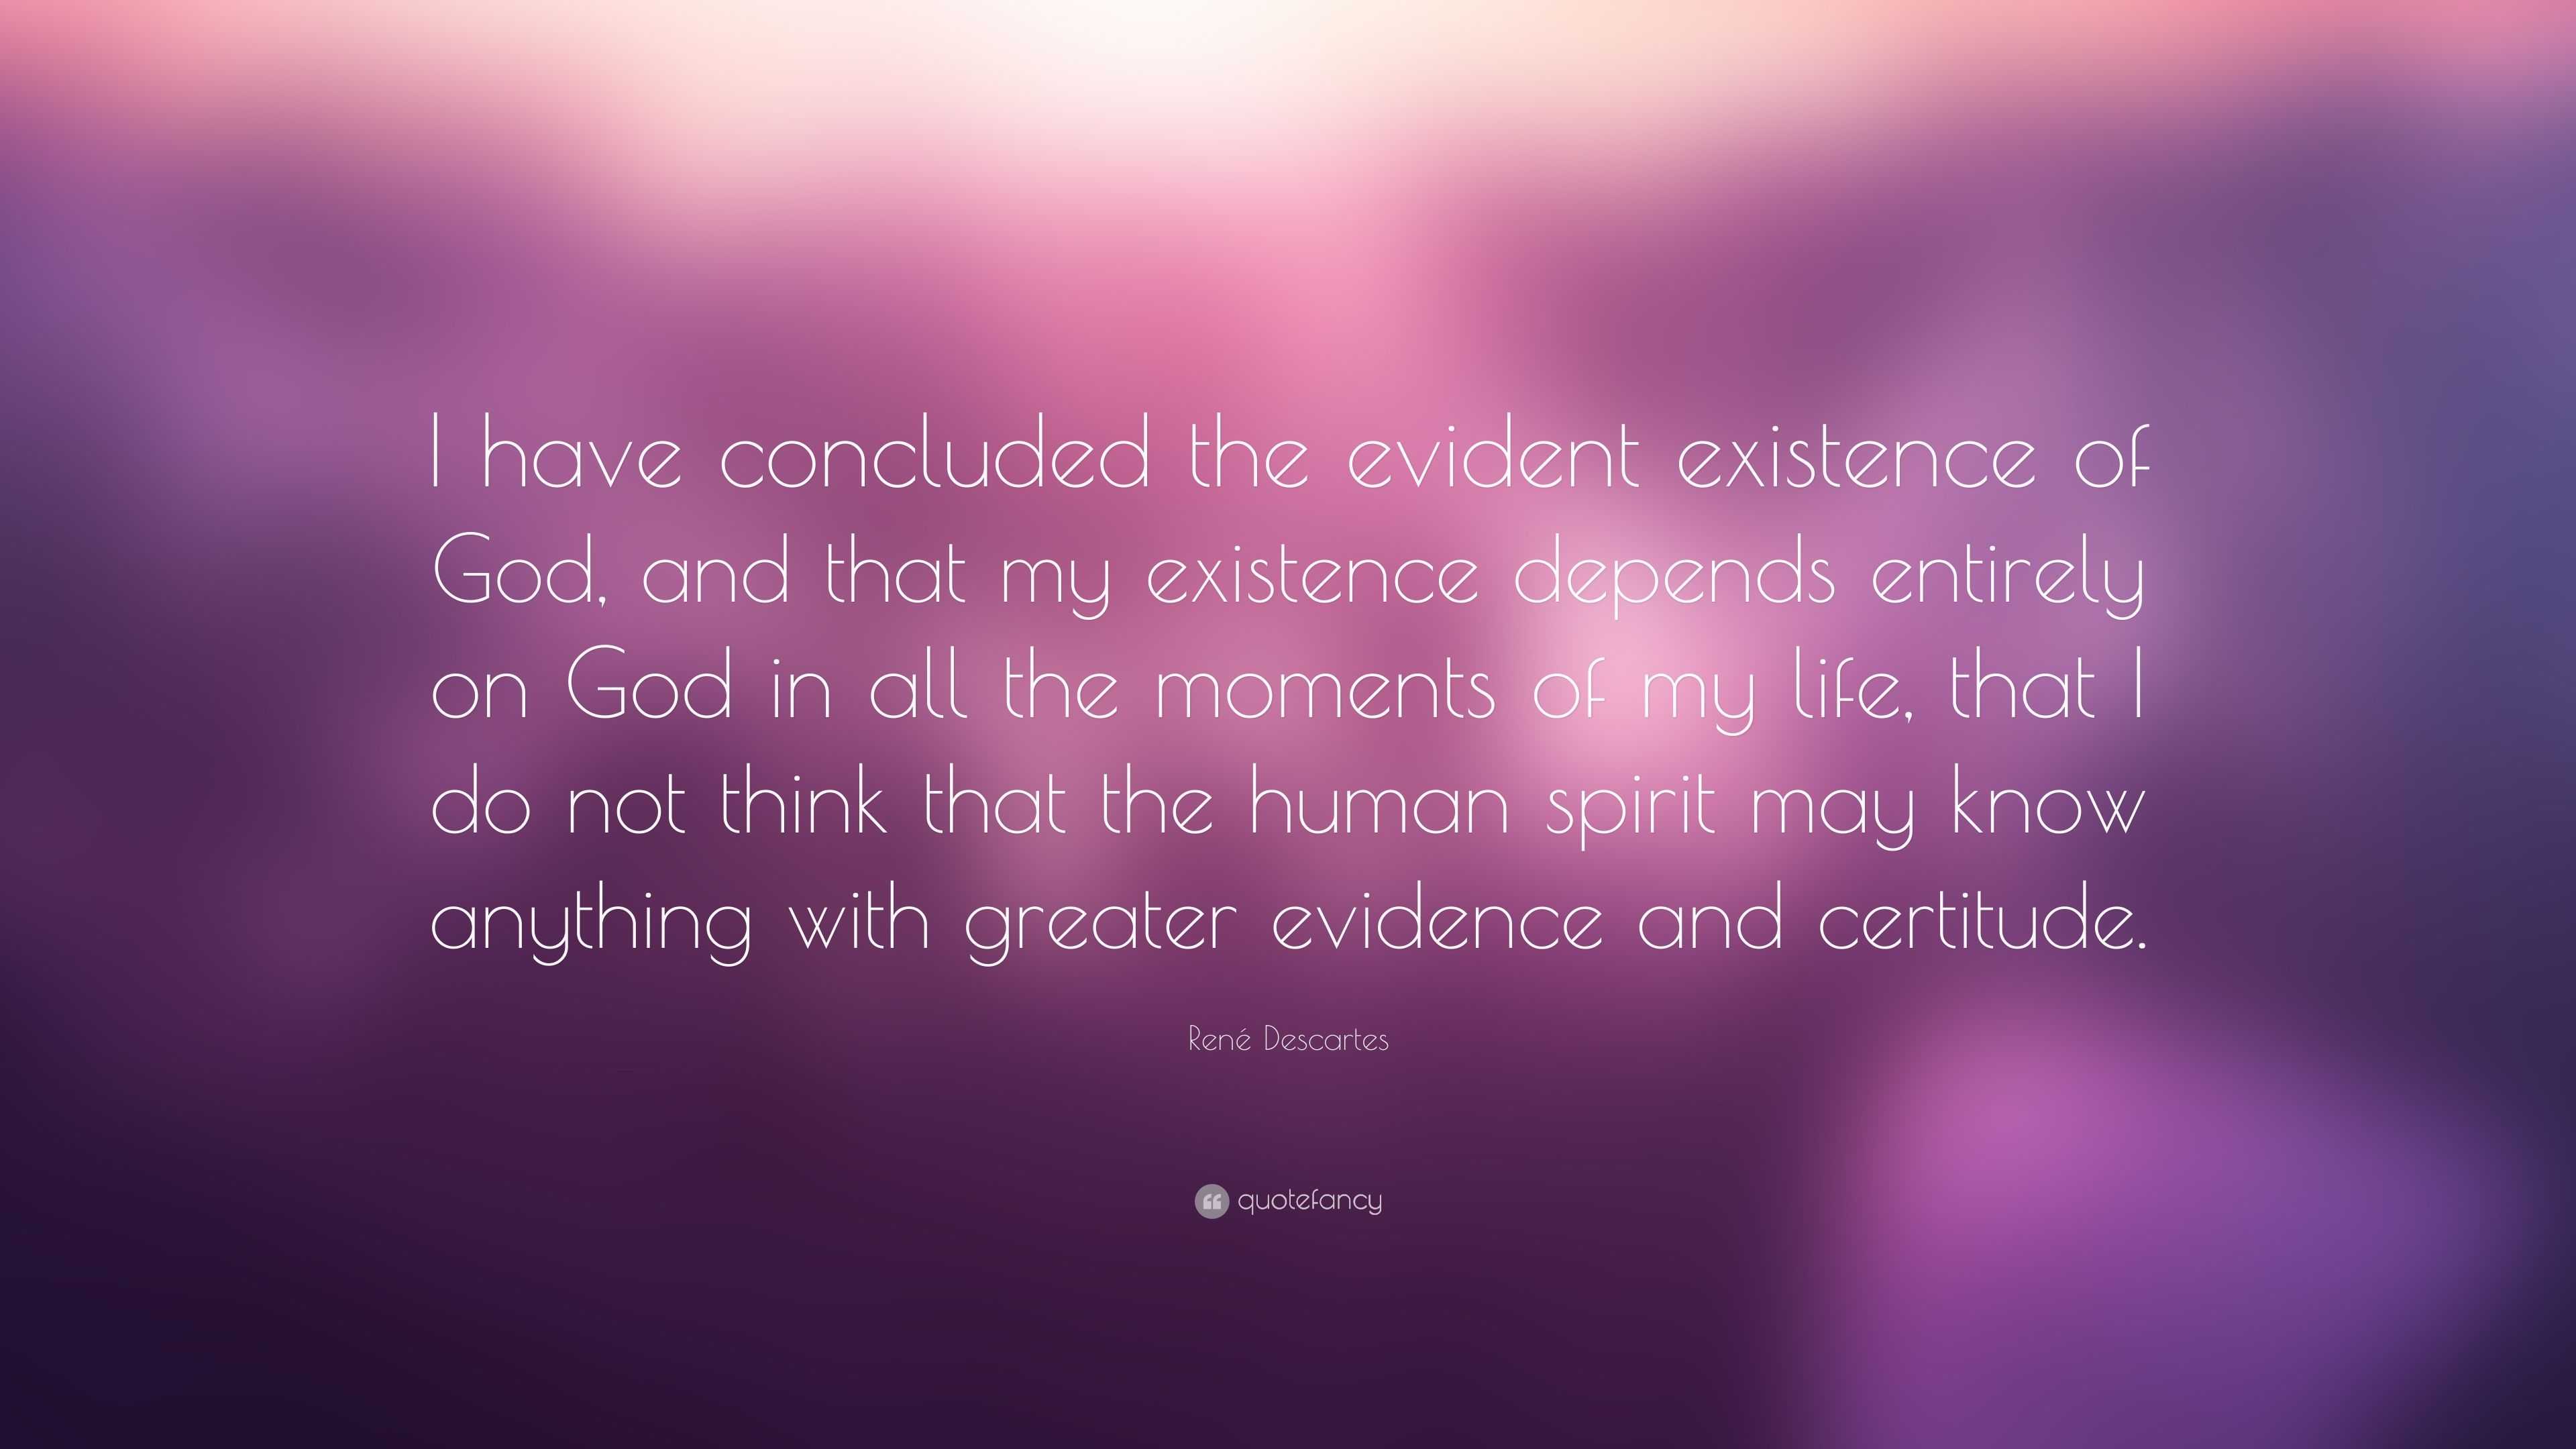 René Descartes Quote: “I have concluded the evident existence of God ...